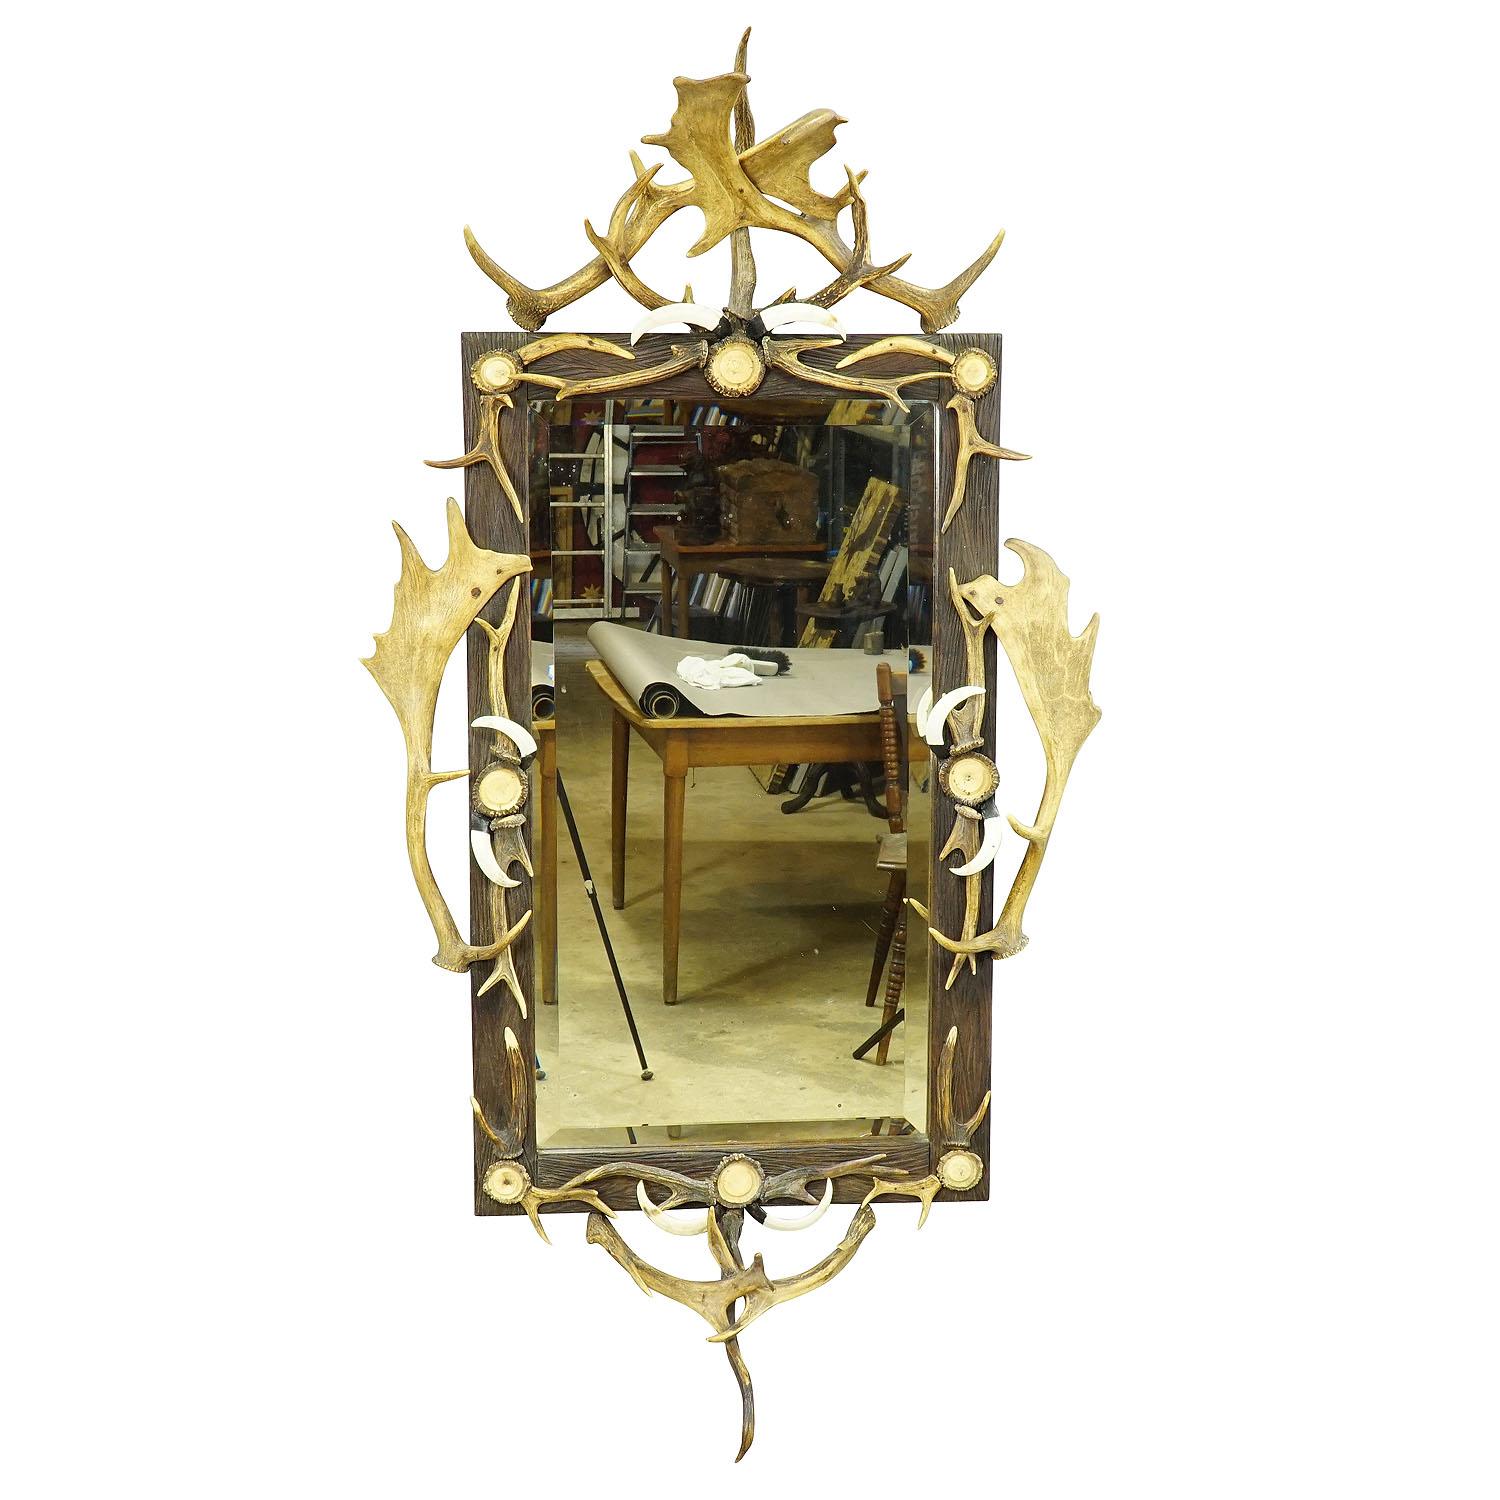 Large Antique Mirror with Rustic Antler Decorations

A large impressive antler mirror decorated with turned horn roses and antler pieces of the deer, fallow deer and virginia deer. Made in Germany, Black Forest circa 1910.

Antler furniture have